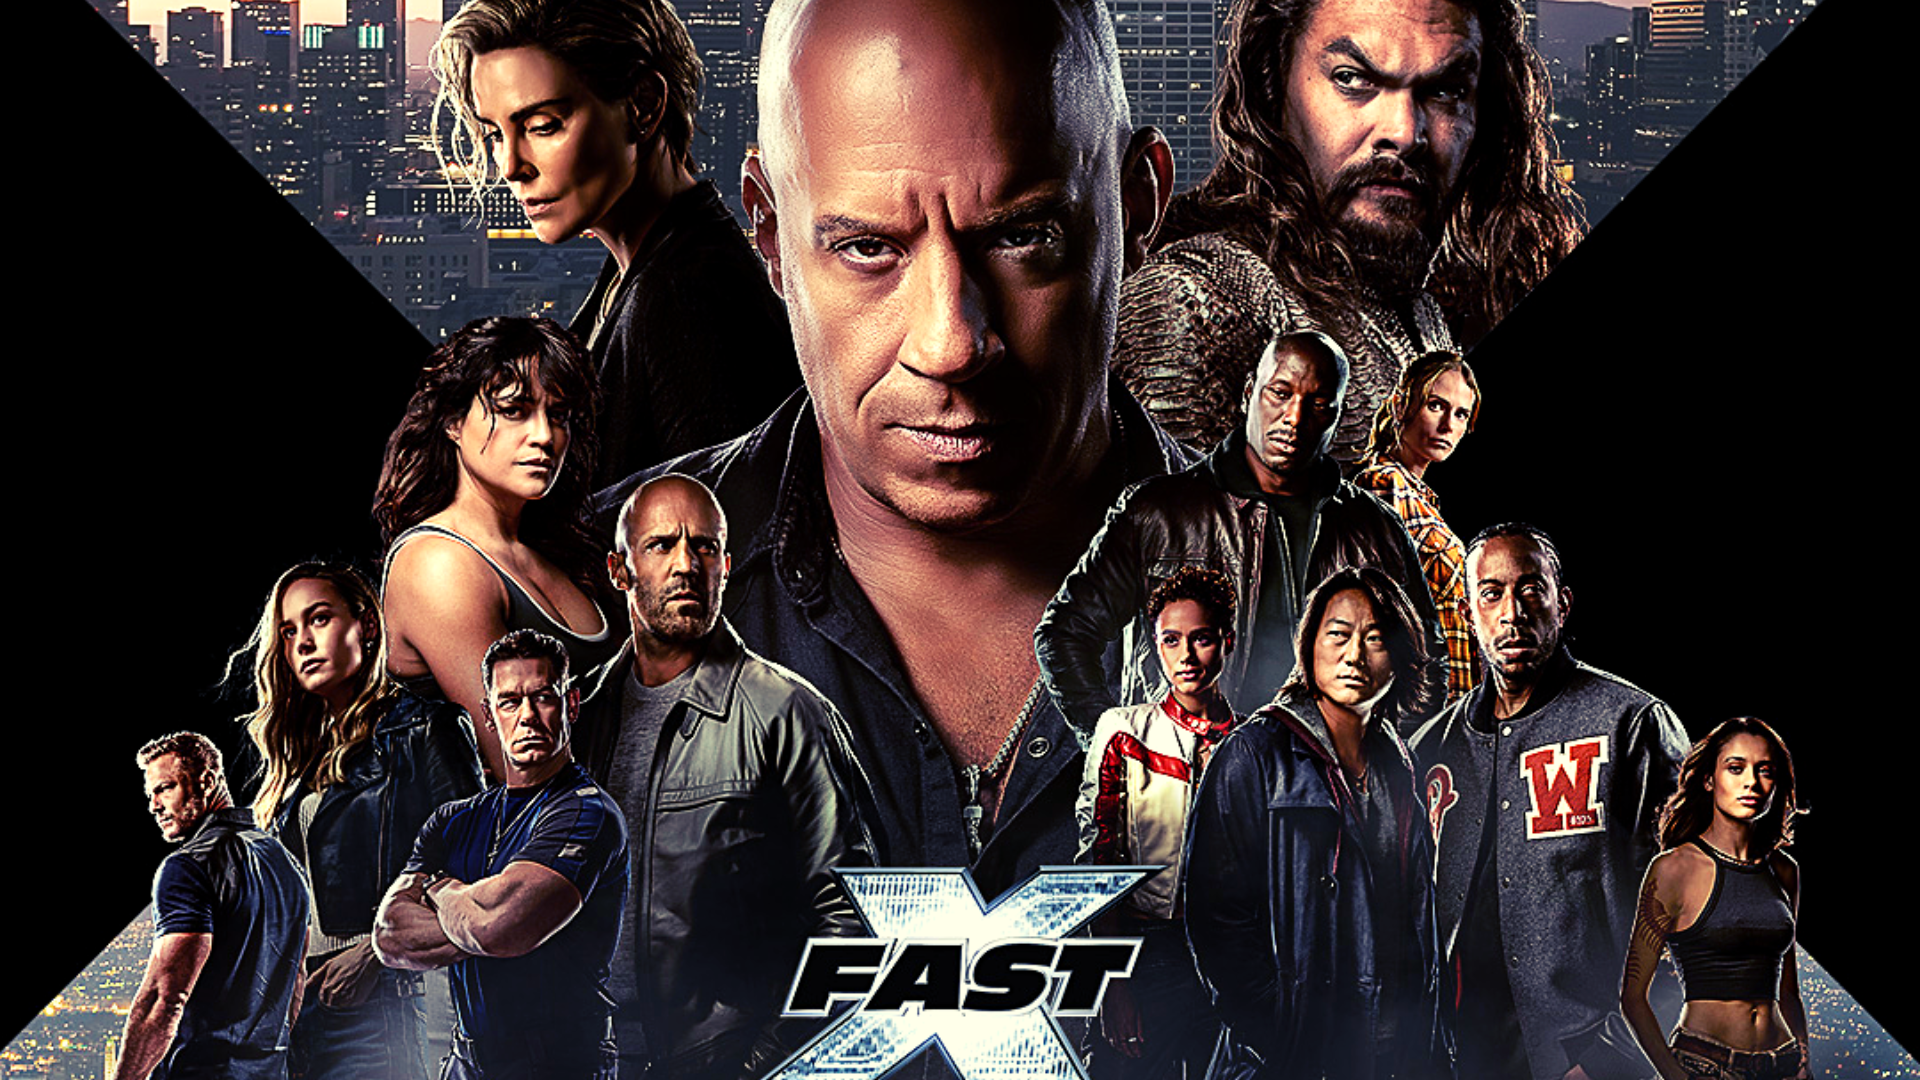 Fast X Movie Ticket Offers: Cut Off The Price Margin Up To 60%